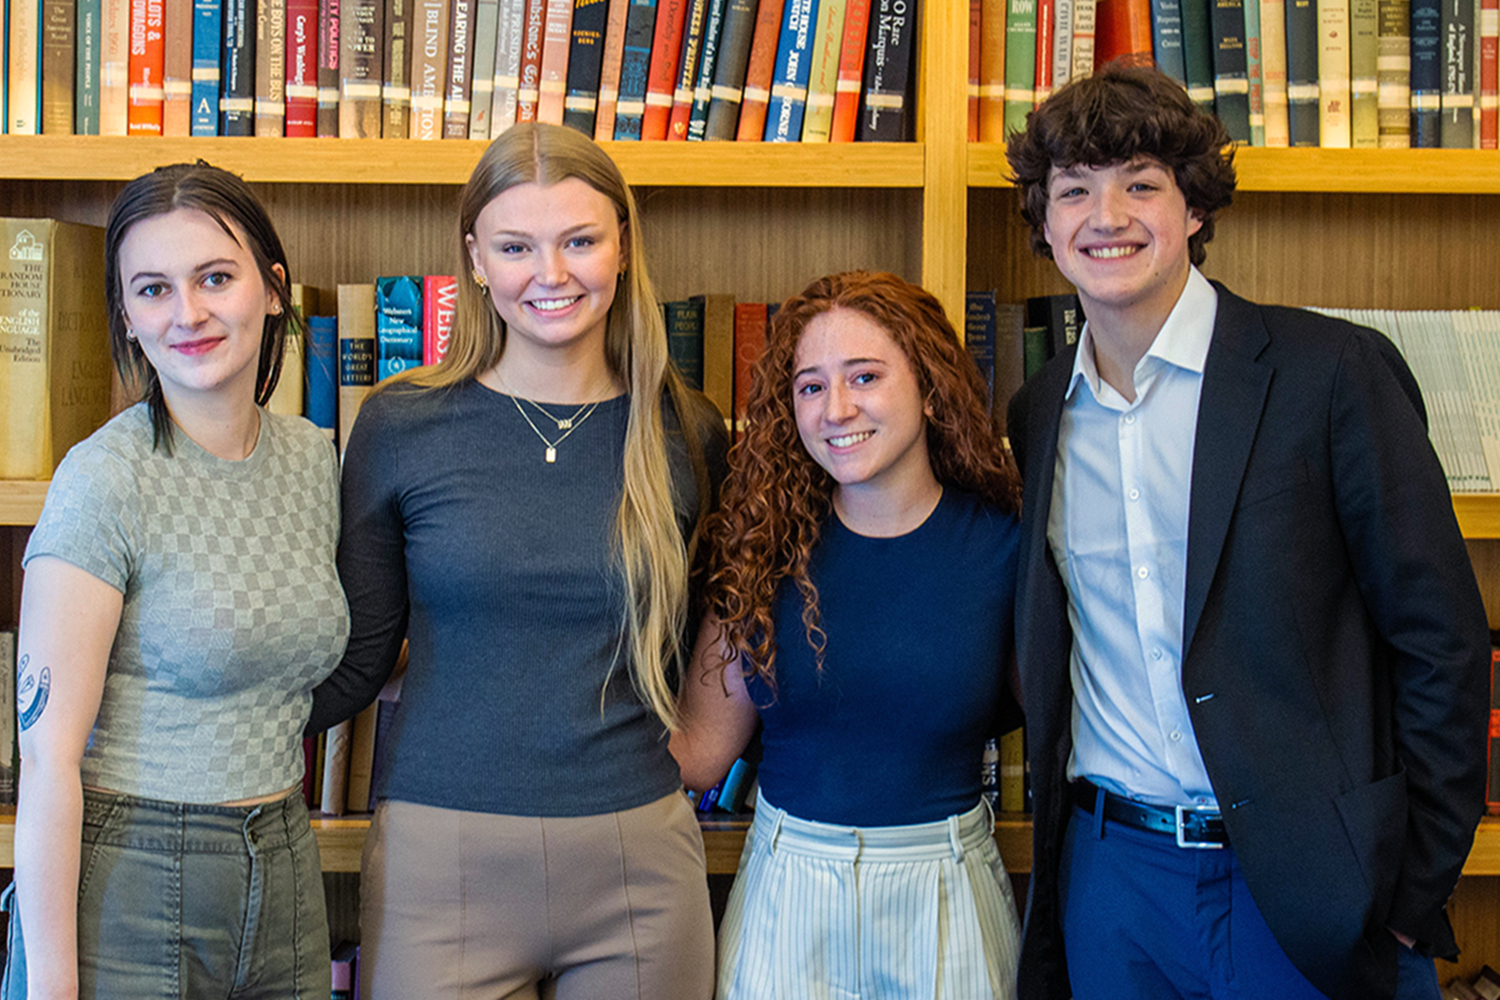 Journalism students left to right: Ally LeMaster ’24 (CLAS), Izetta Asikainen ’24 (CLAS), Coral Aponte ’25 (CLAS), Luke Feeney ’24 (CLAS).